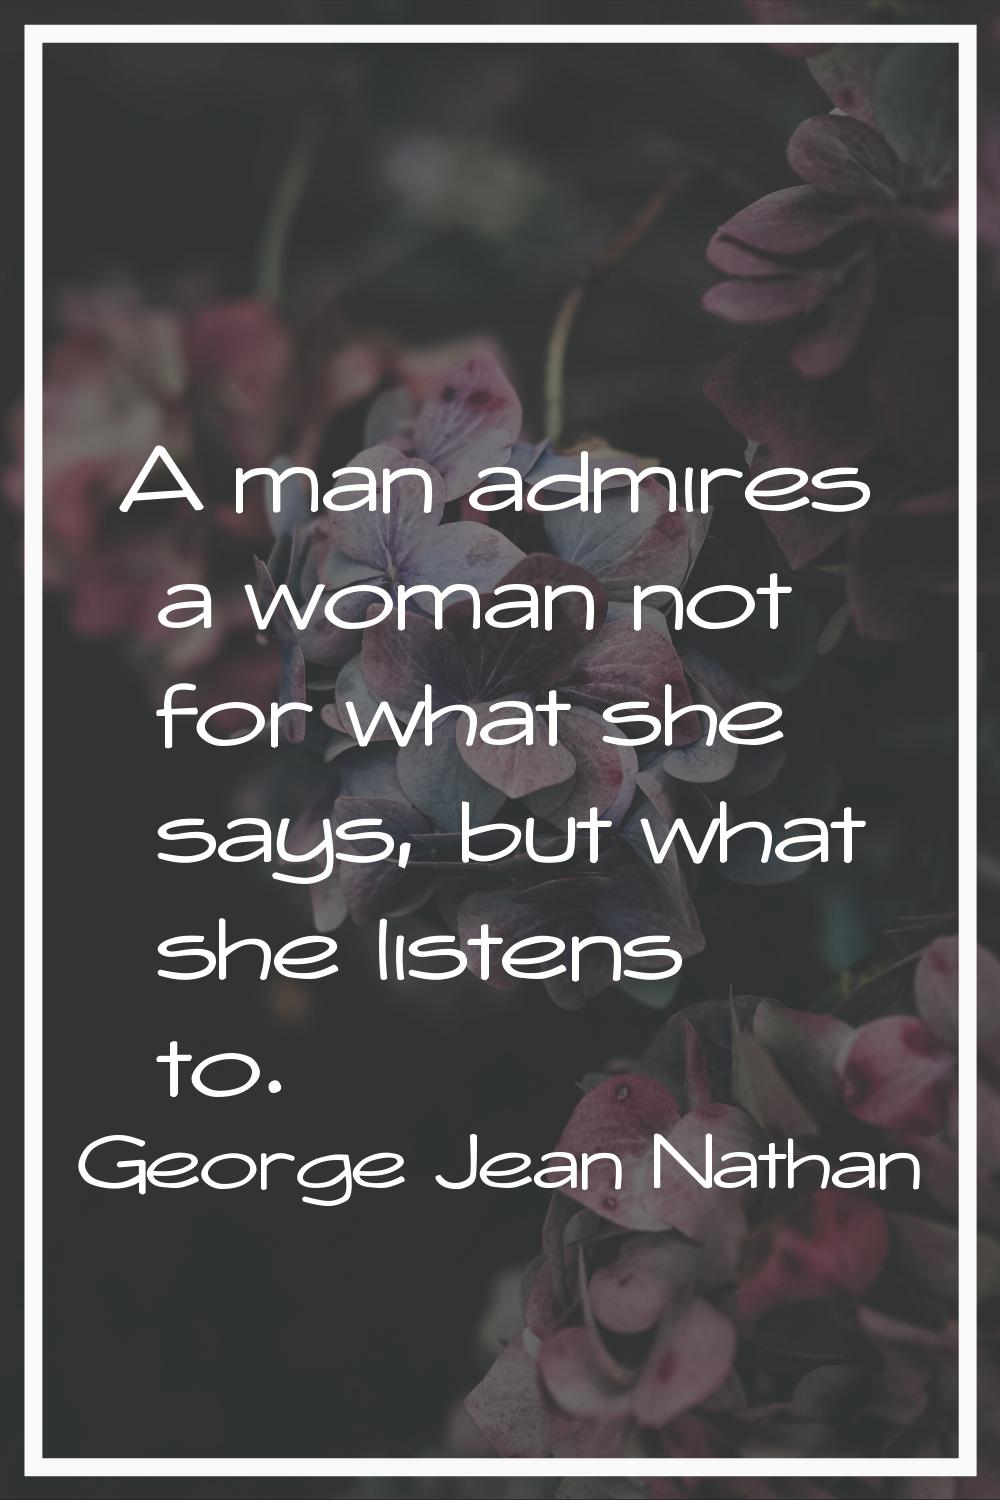 A man admires a woman not for what she says, but what she listens to.